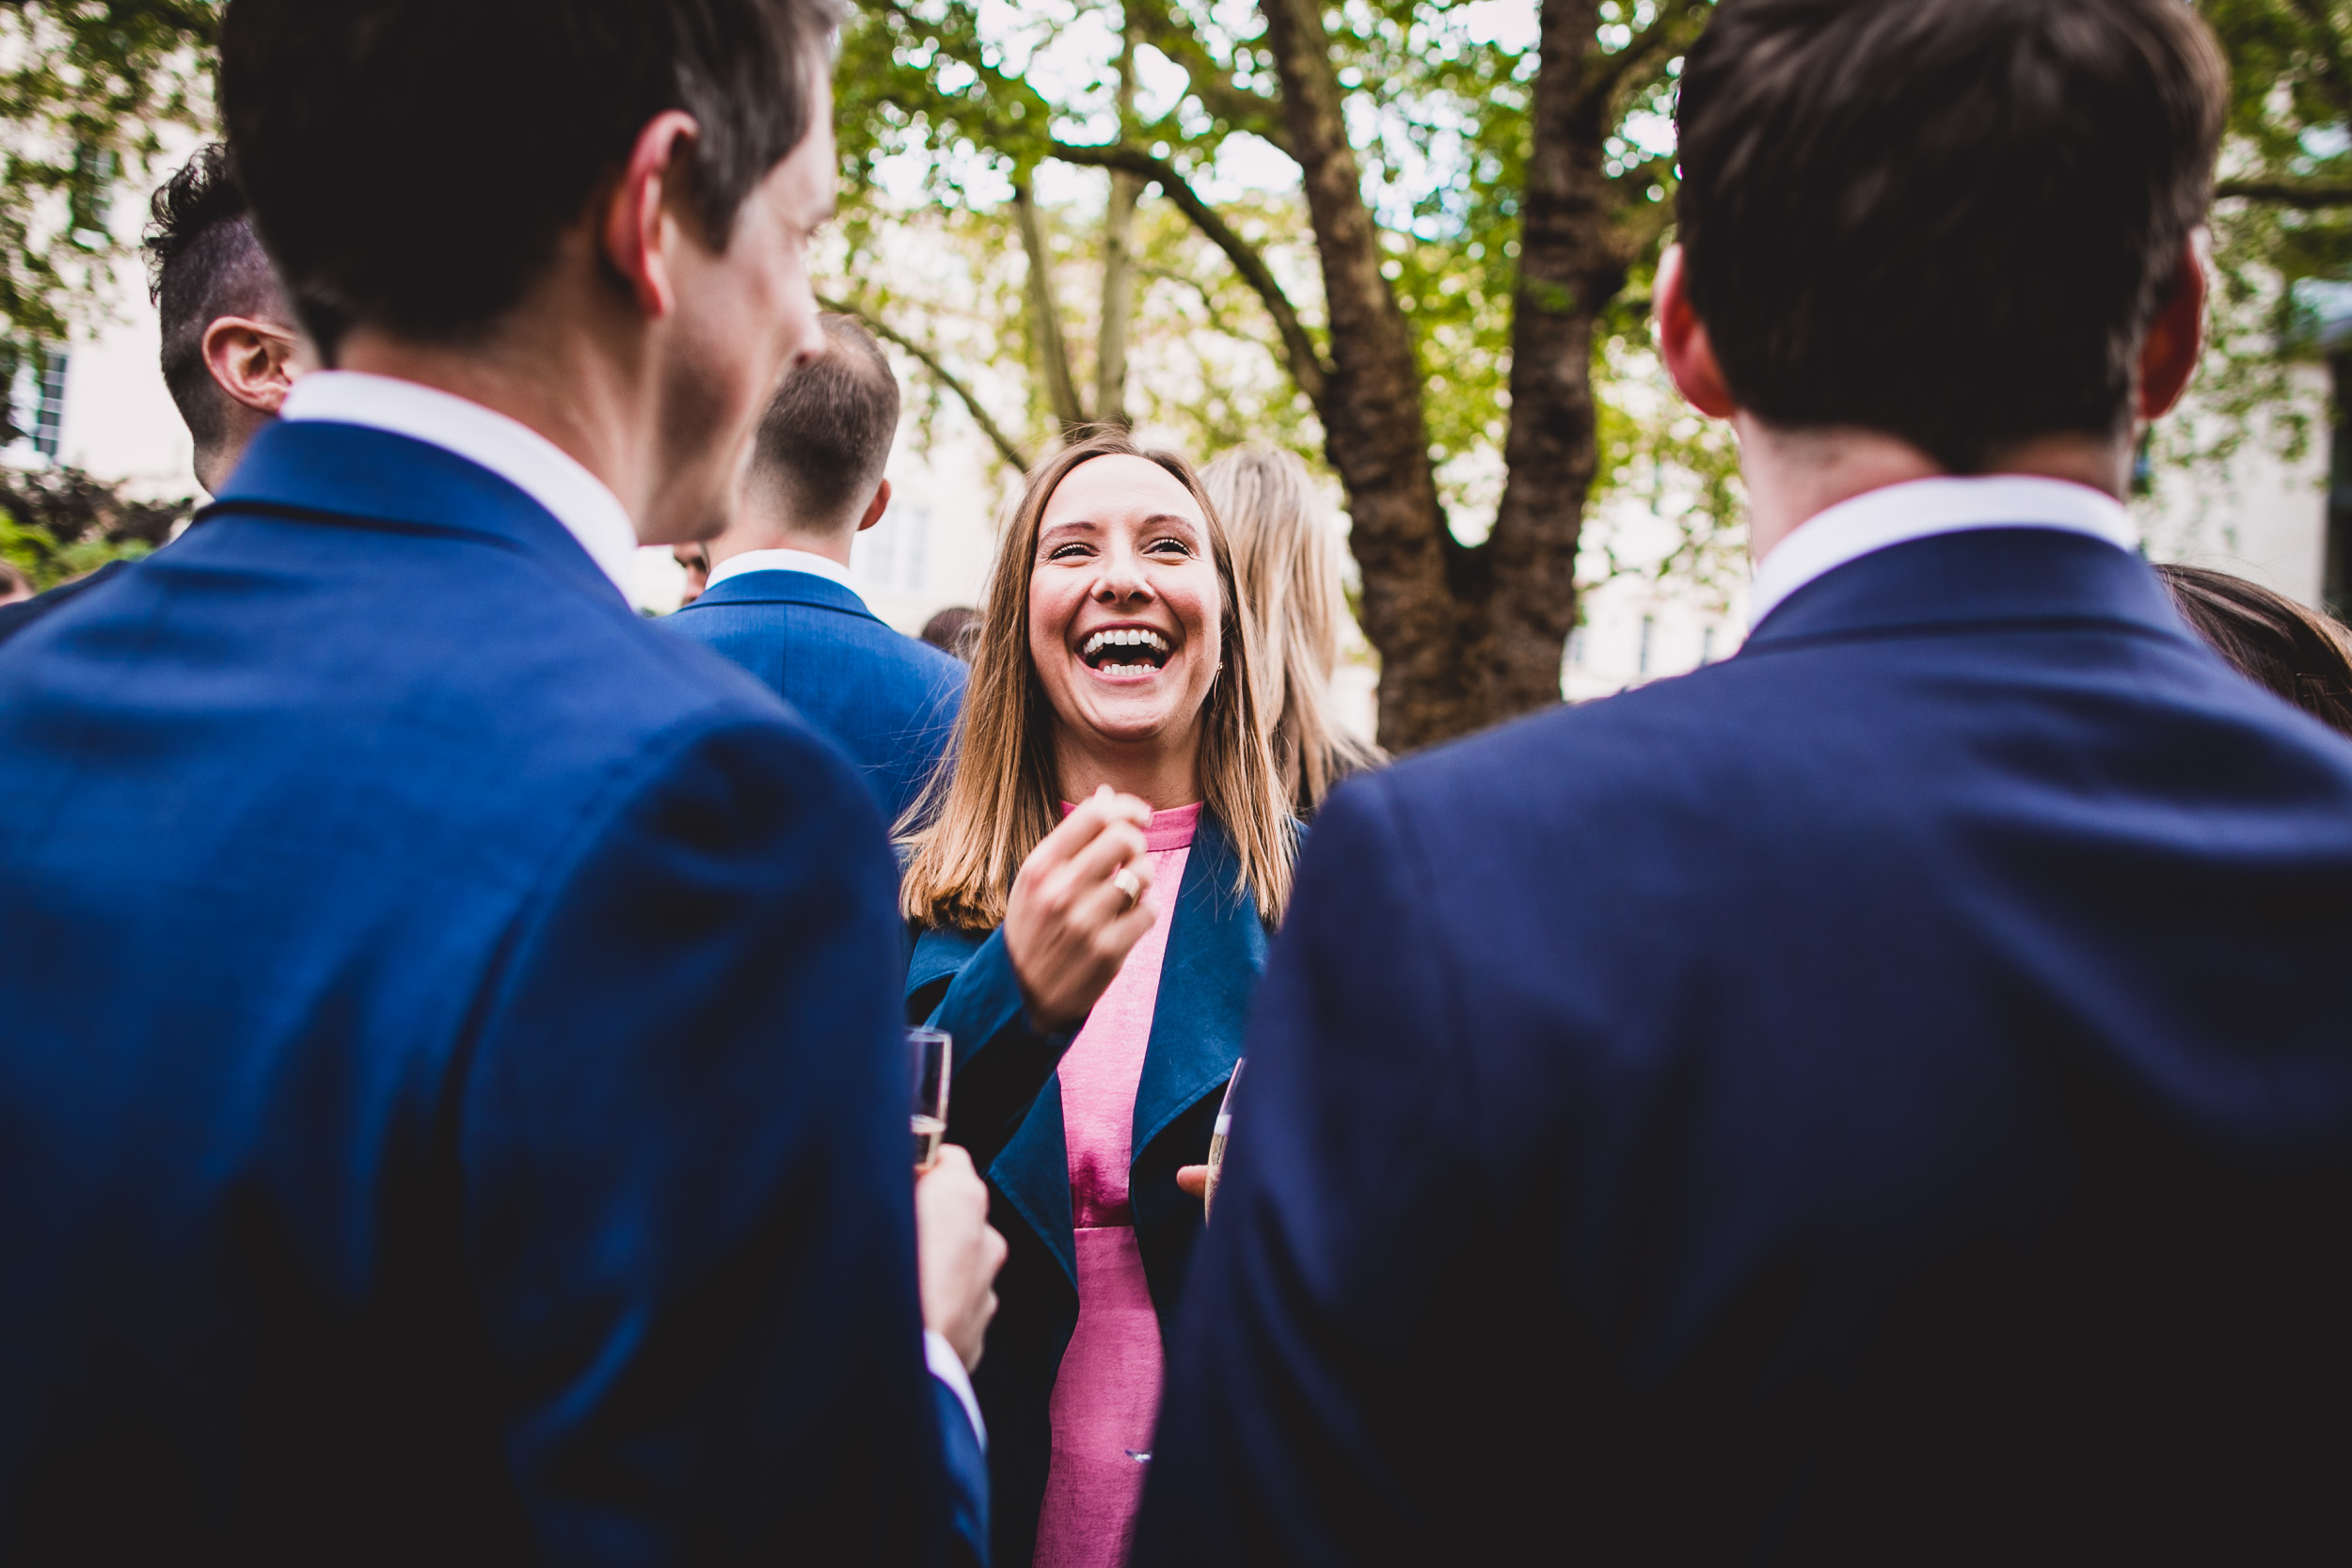 A group of people joyfully celebrating at a wedding party, captured by a wedding photographer.